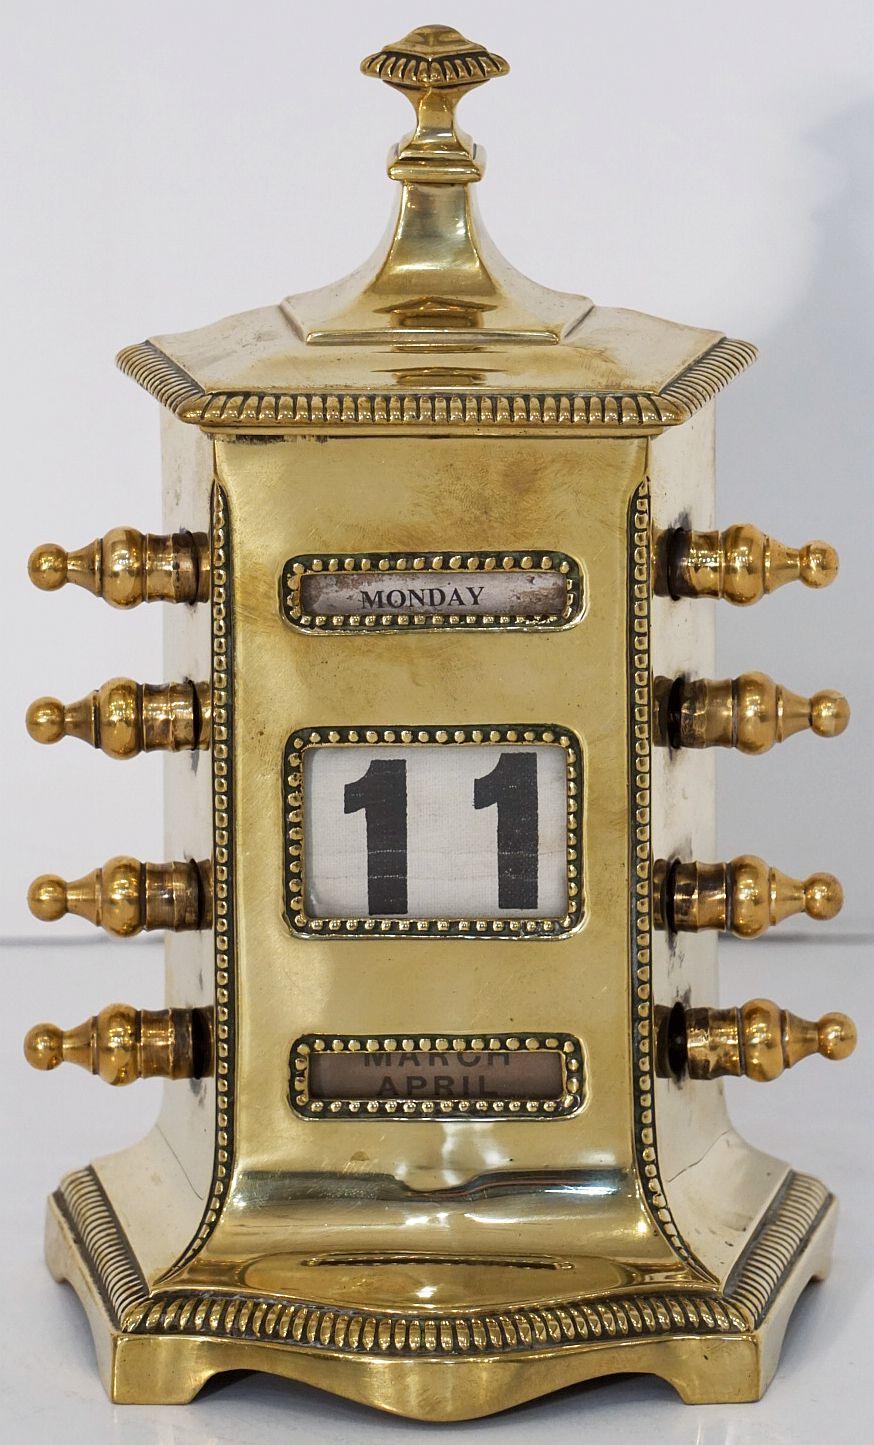 A handsome English perpetual desk calendar of cast brass by the celebrated brass foundry maker William Tonks and Sons. Featuring a stepped top with a decorative beaded edge, flared sides and front with matching design, three view windows to the